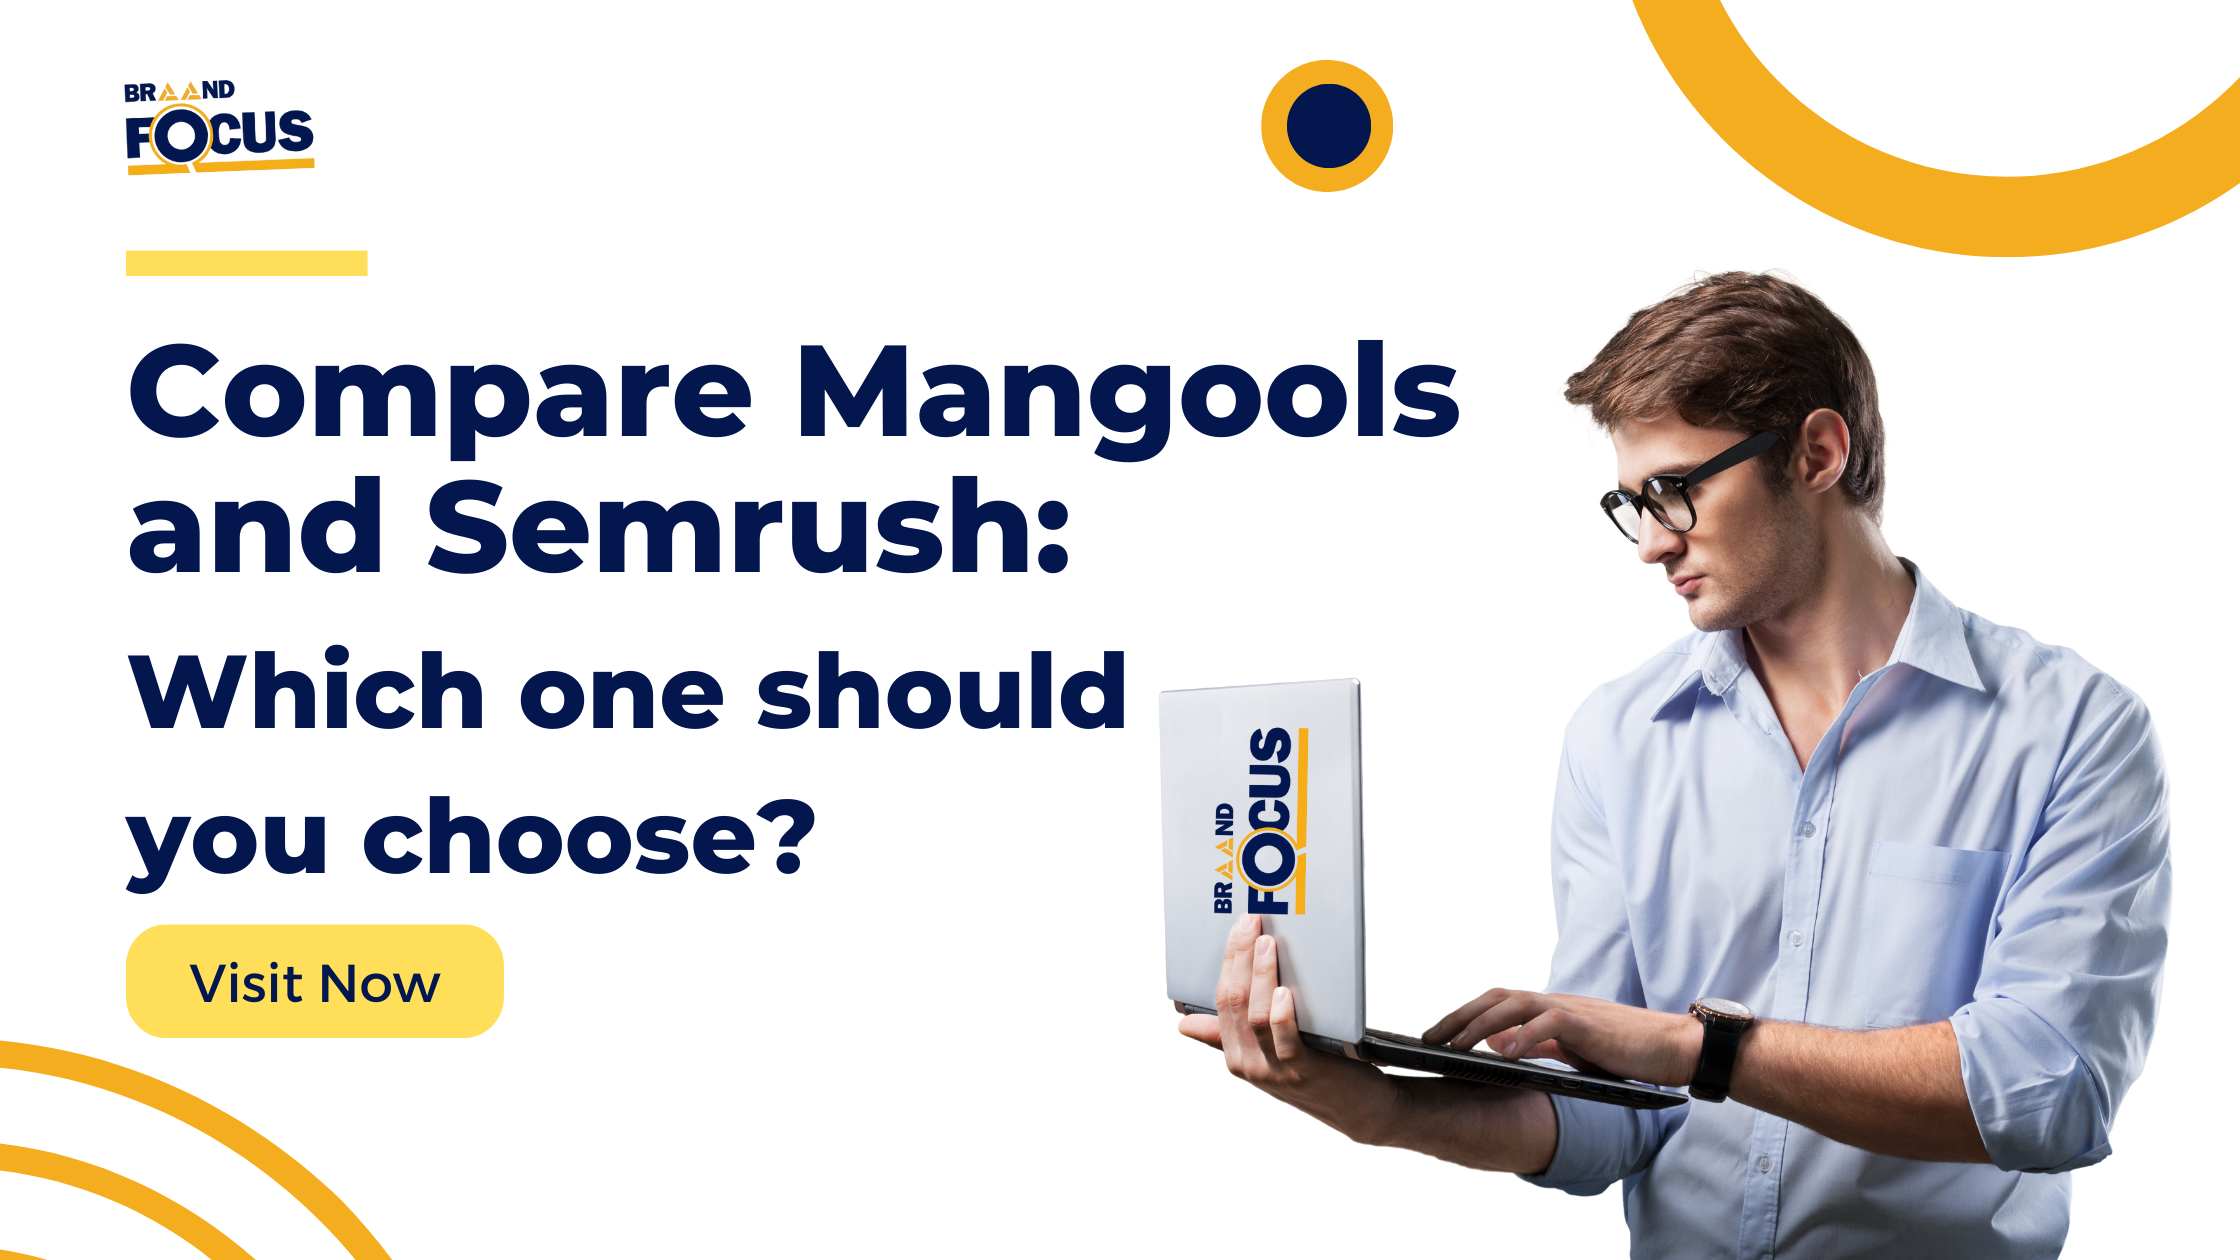 A man holding a camera comparing Mangolos and SEMrush, two options for you to choose from.